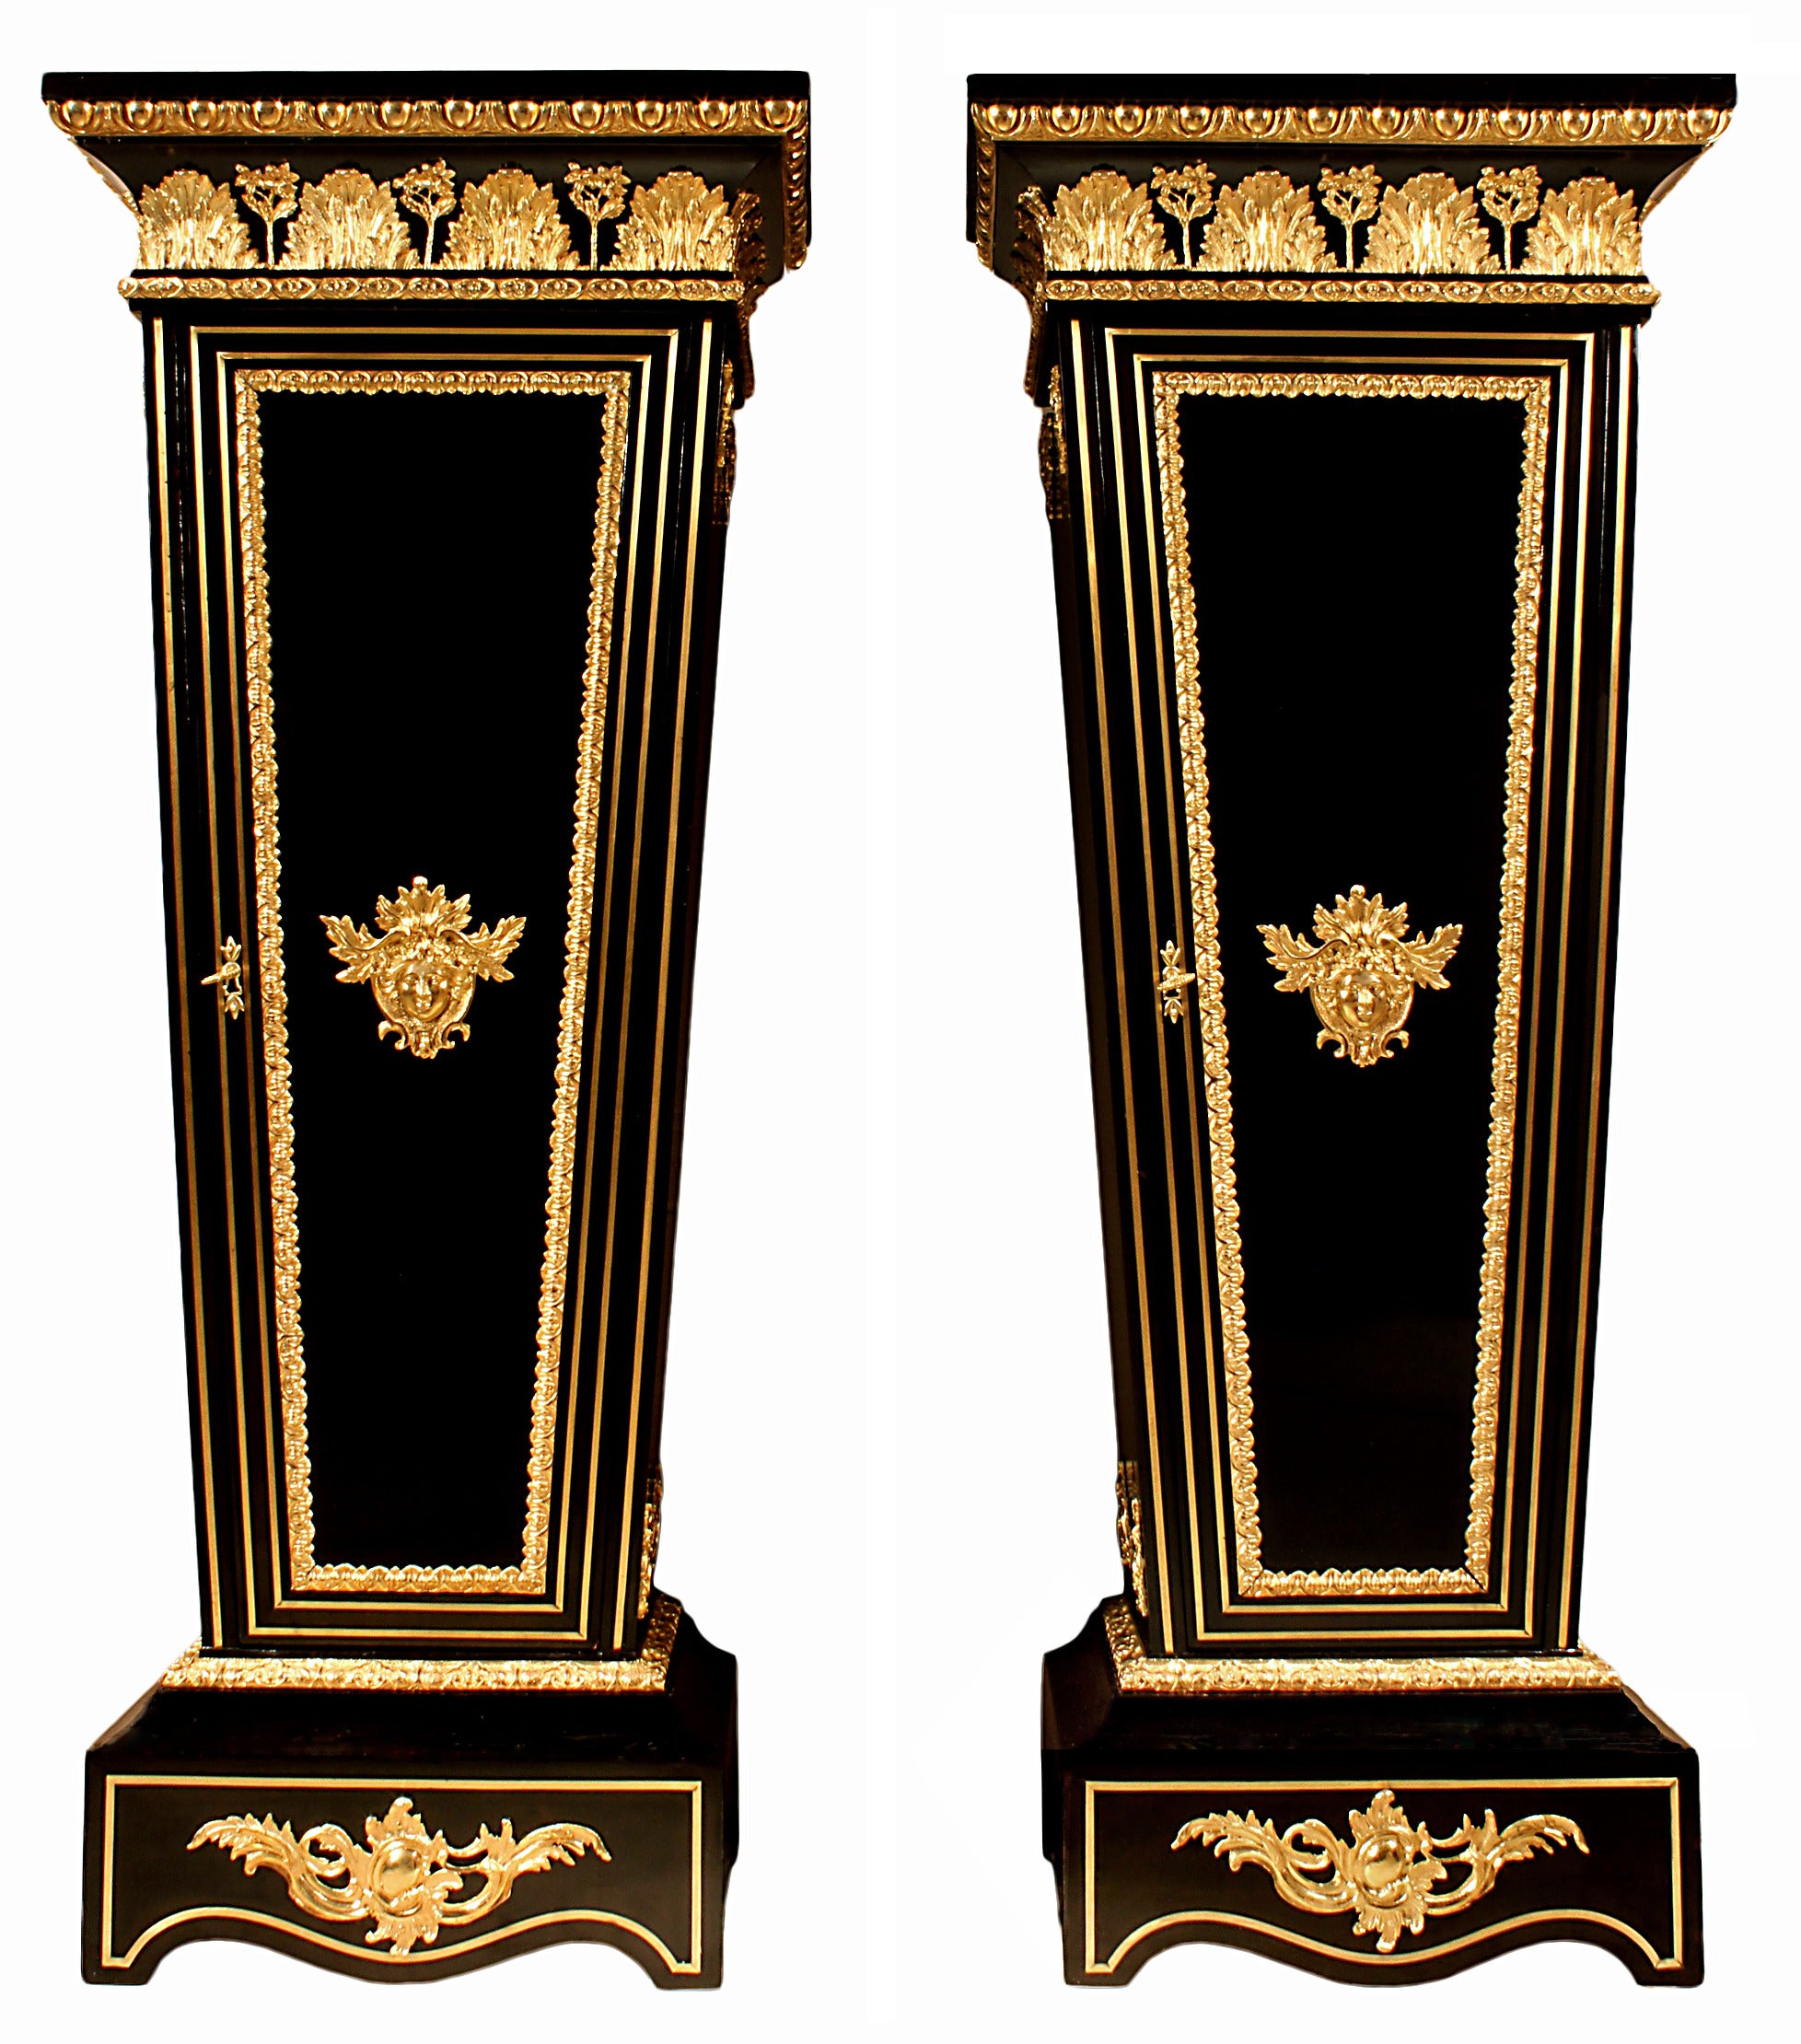 Pair of 19th Century French Louis XVI Style Ebony, Brass and Ormolu Pedestals